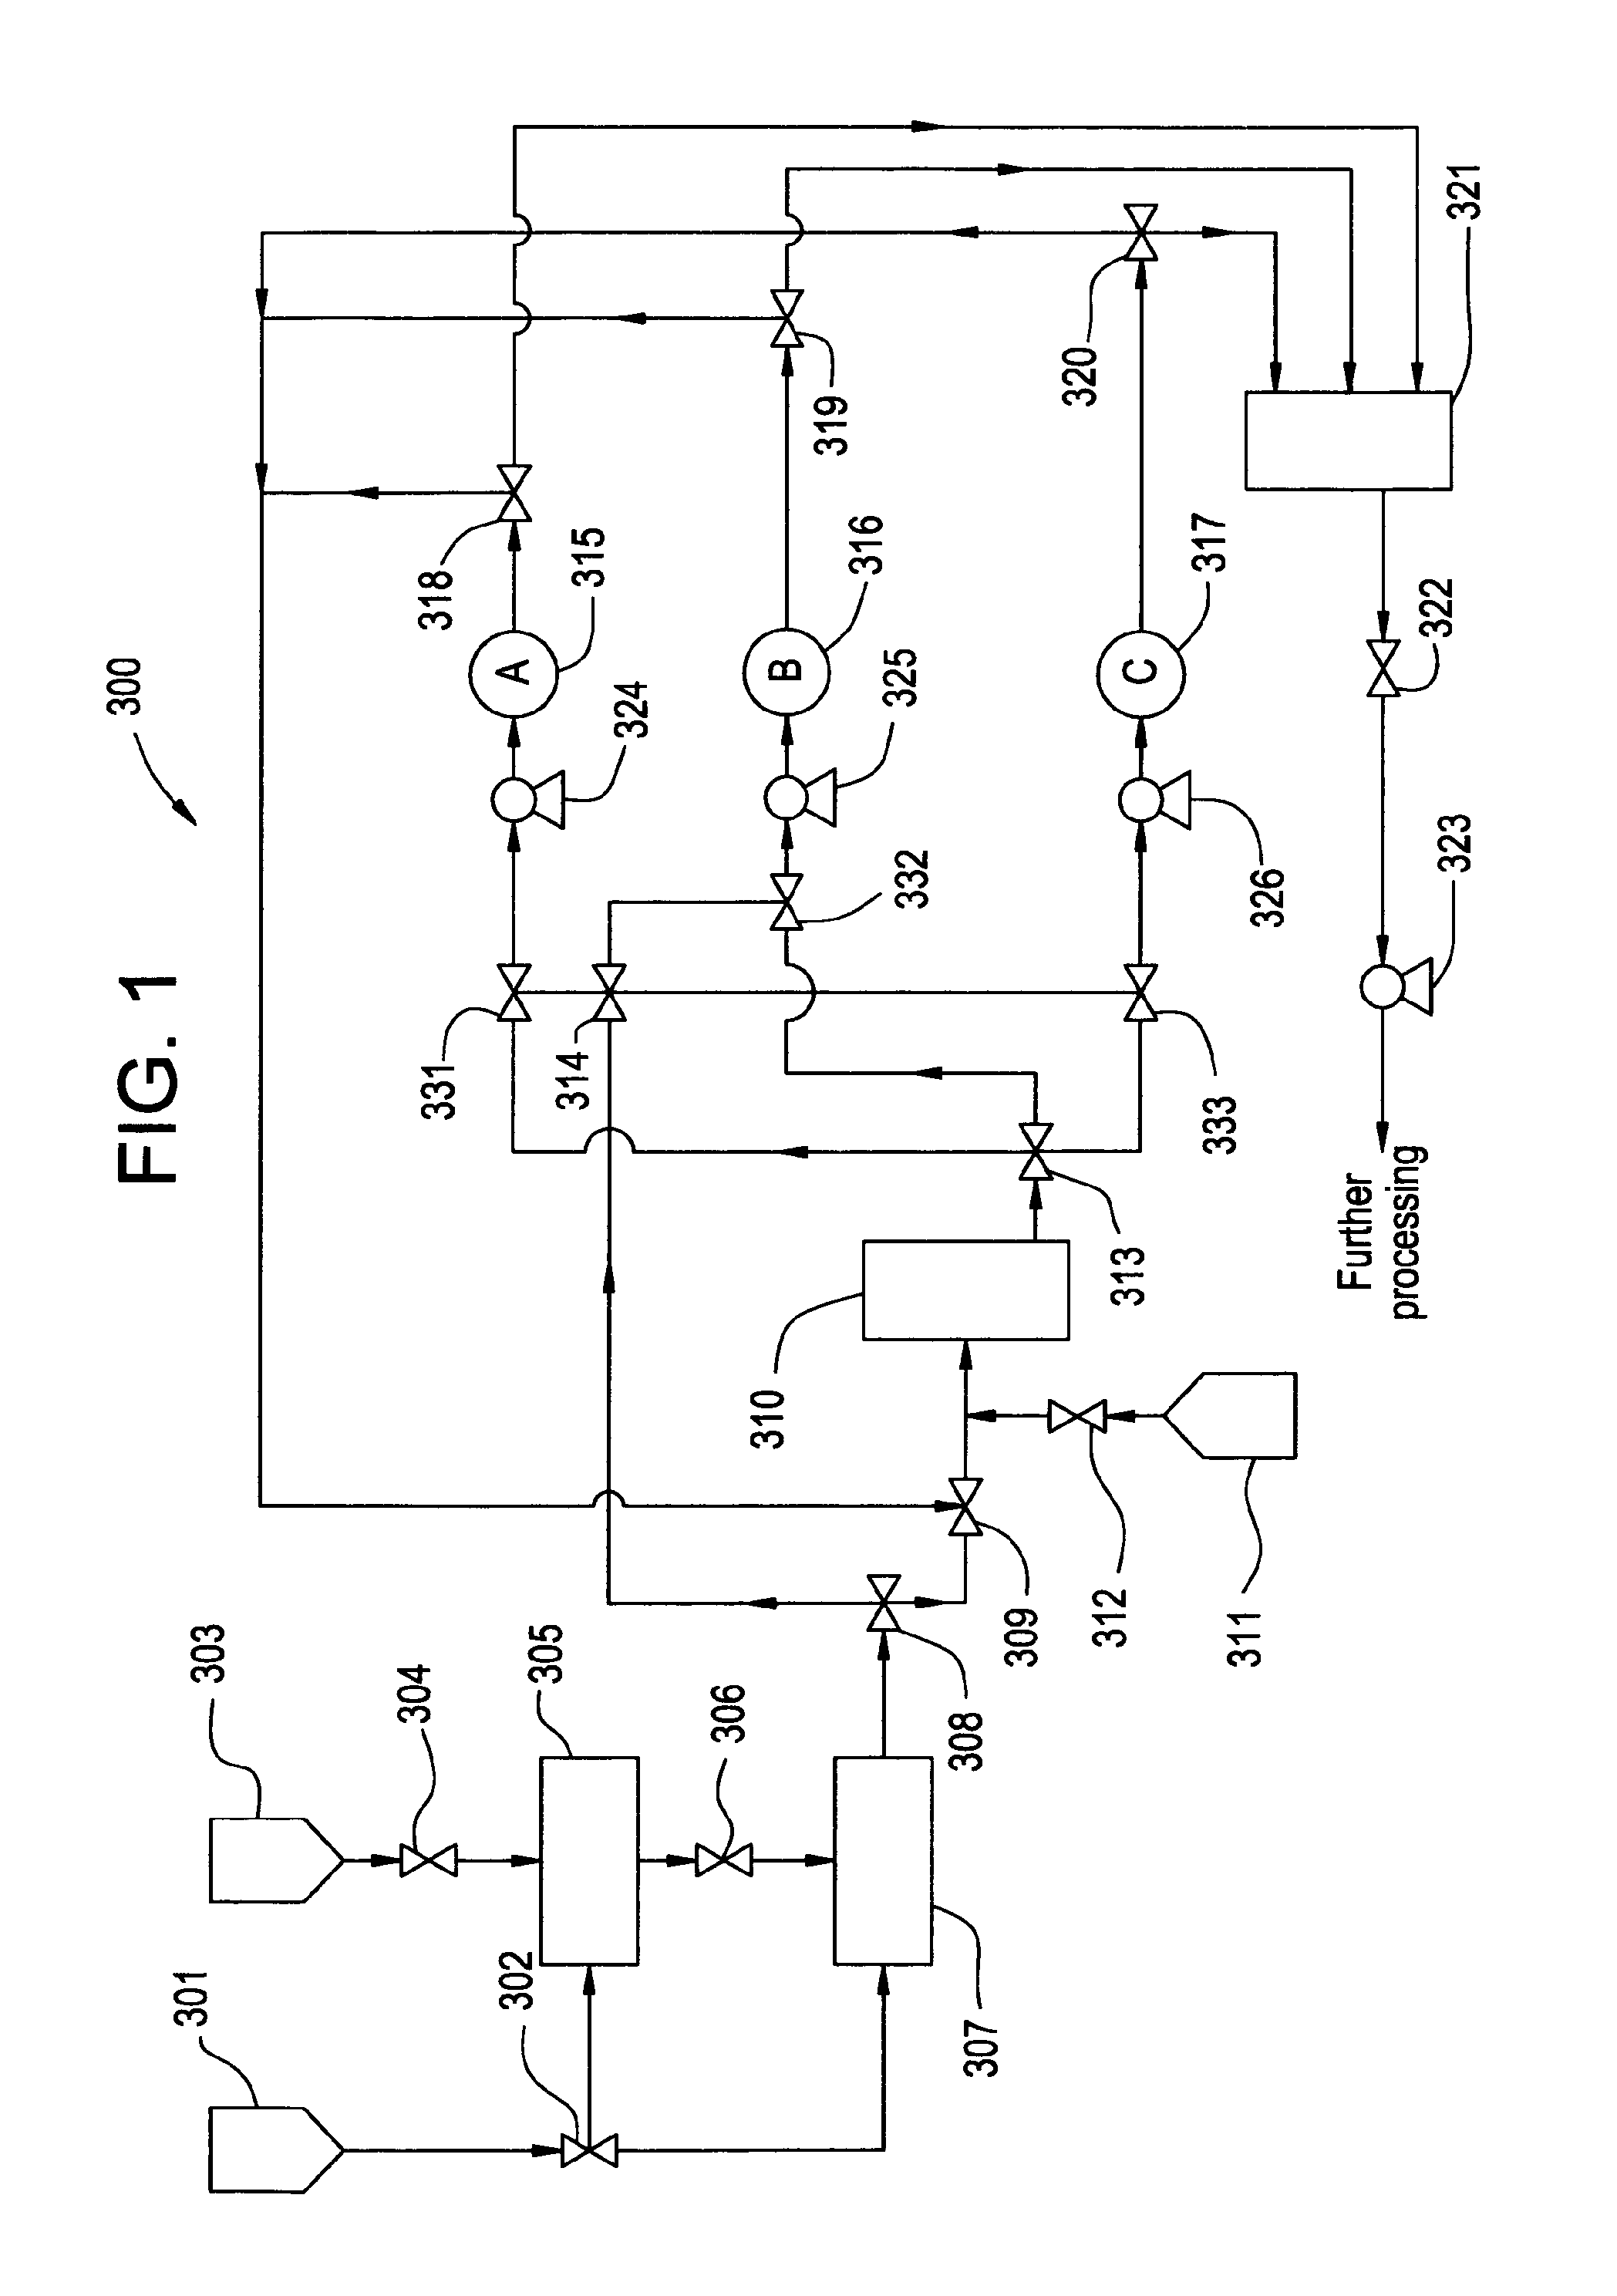 Staggered filtration system and method for using the same for processing fluids such as oils